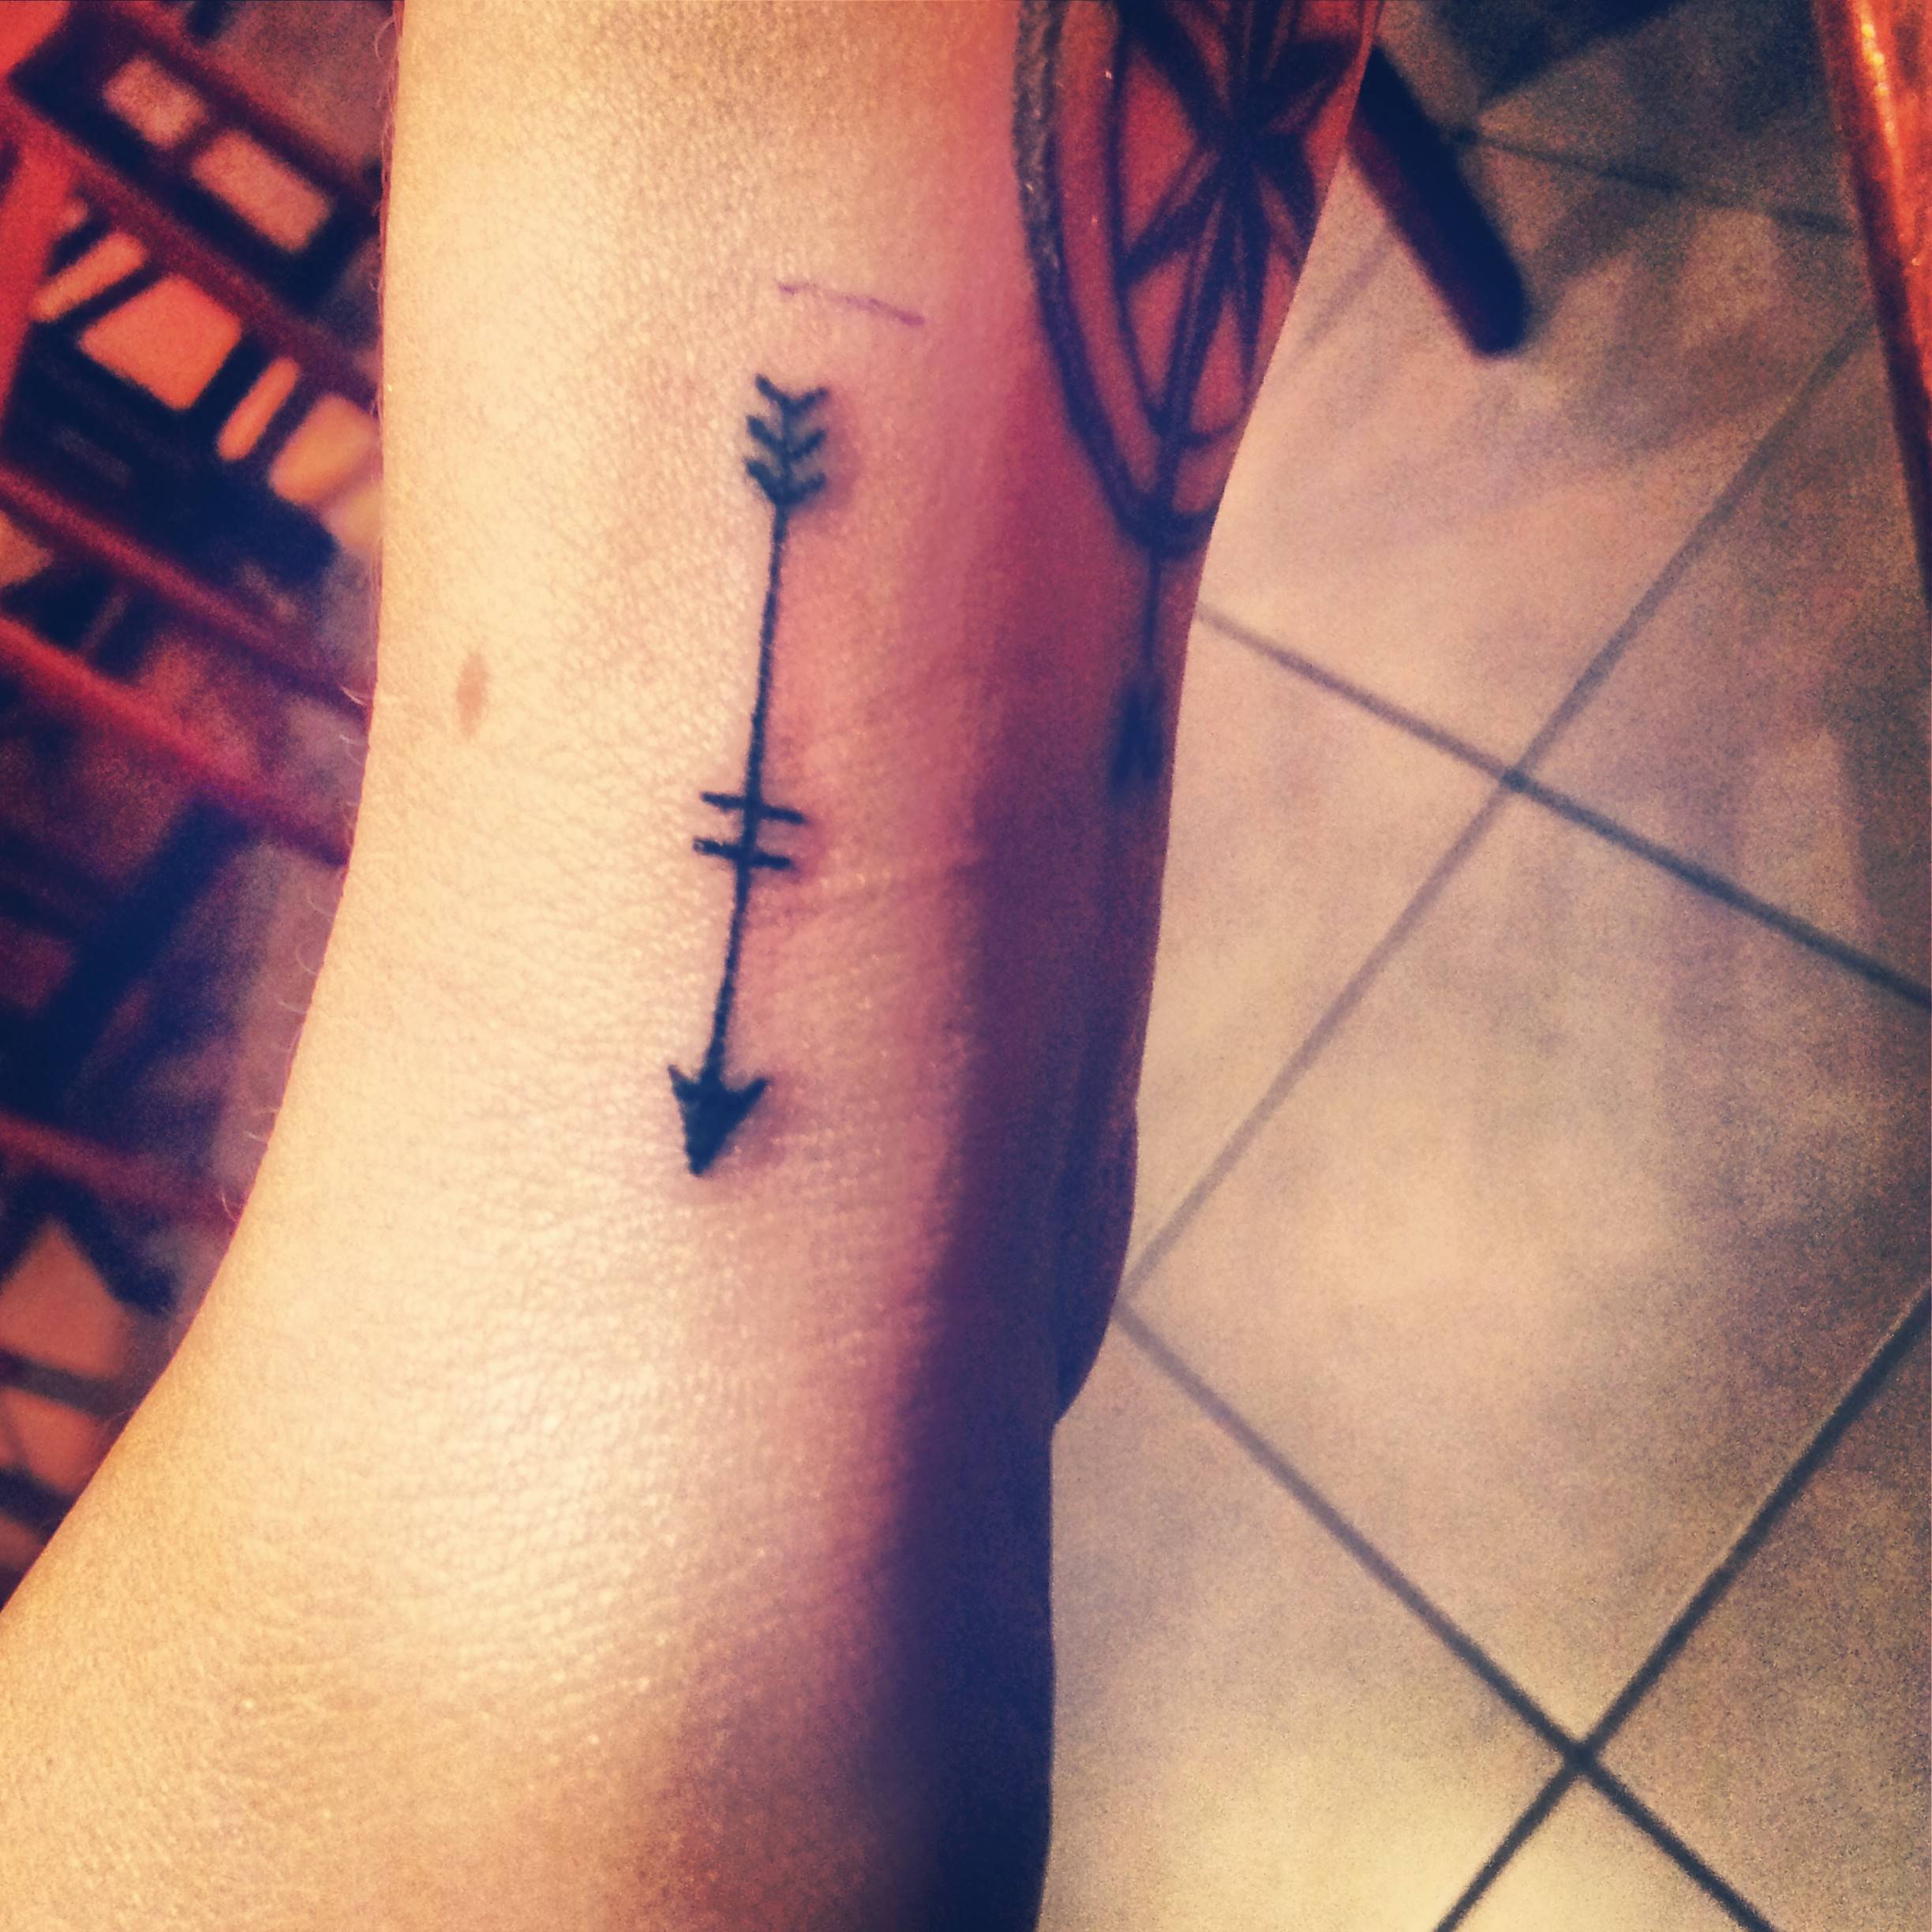 Arrow Tattoos Designs, Ideas and Meaning | Tattoos For You